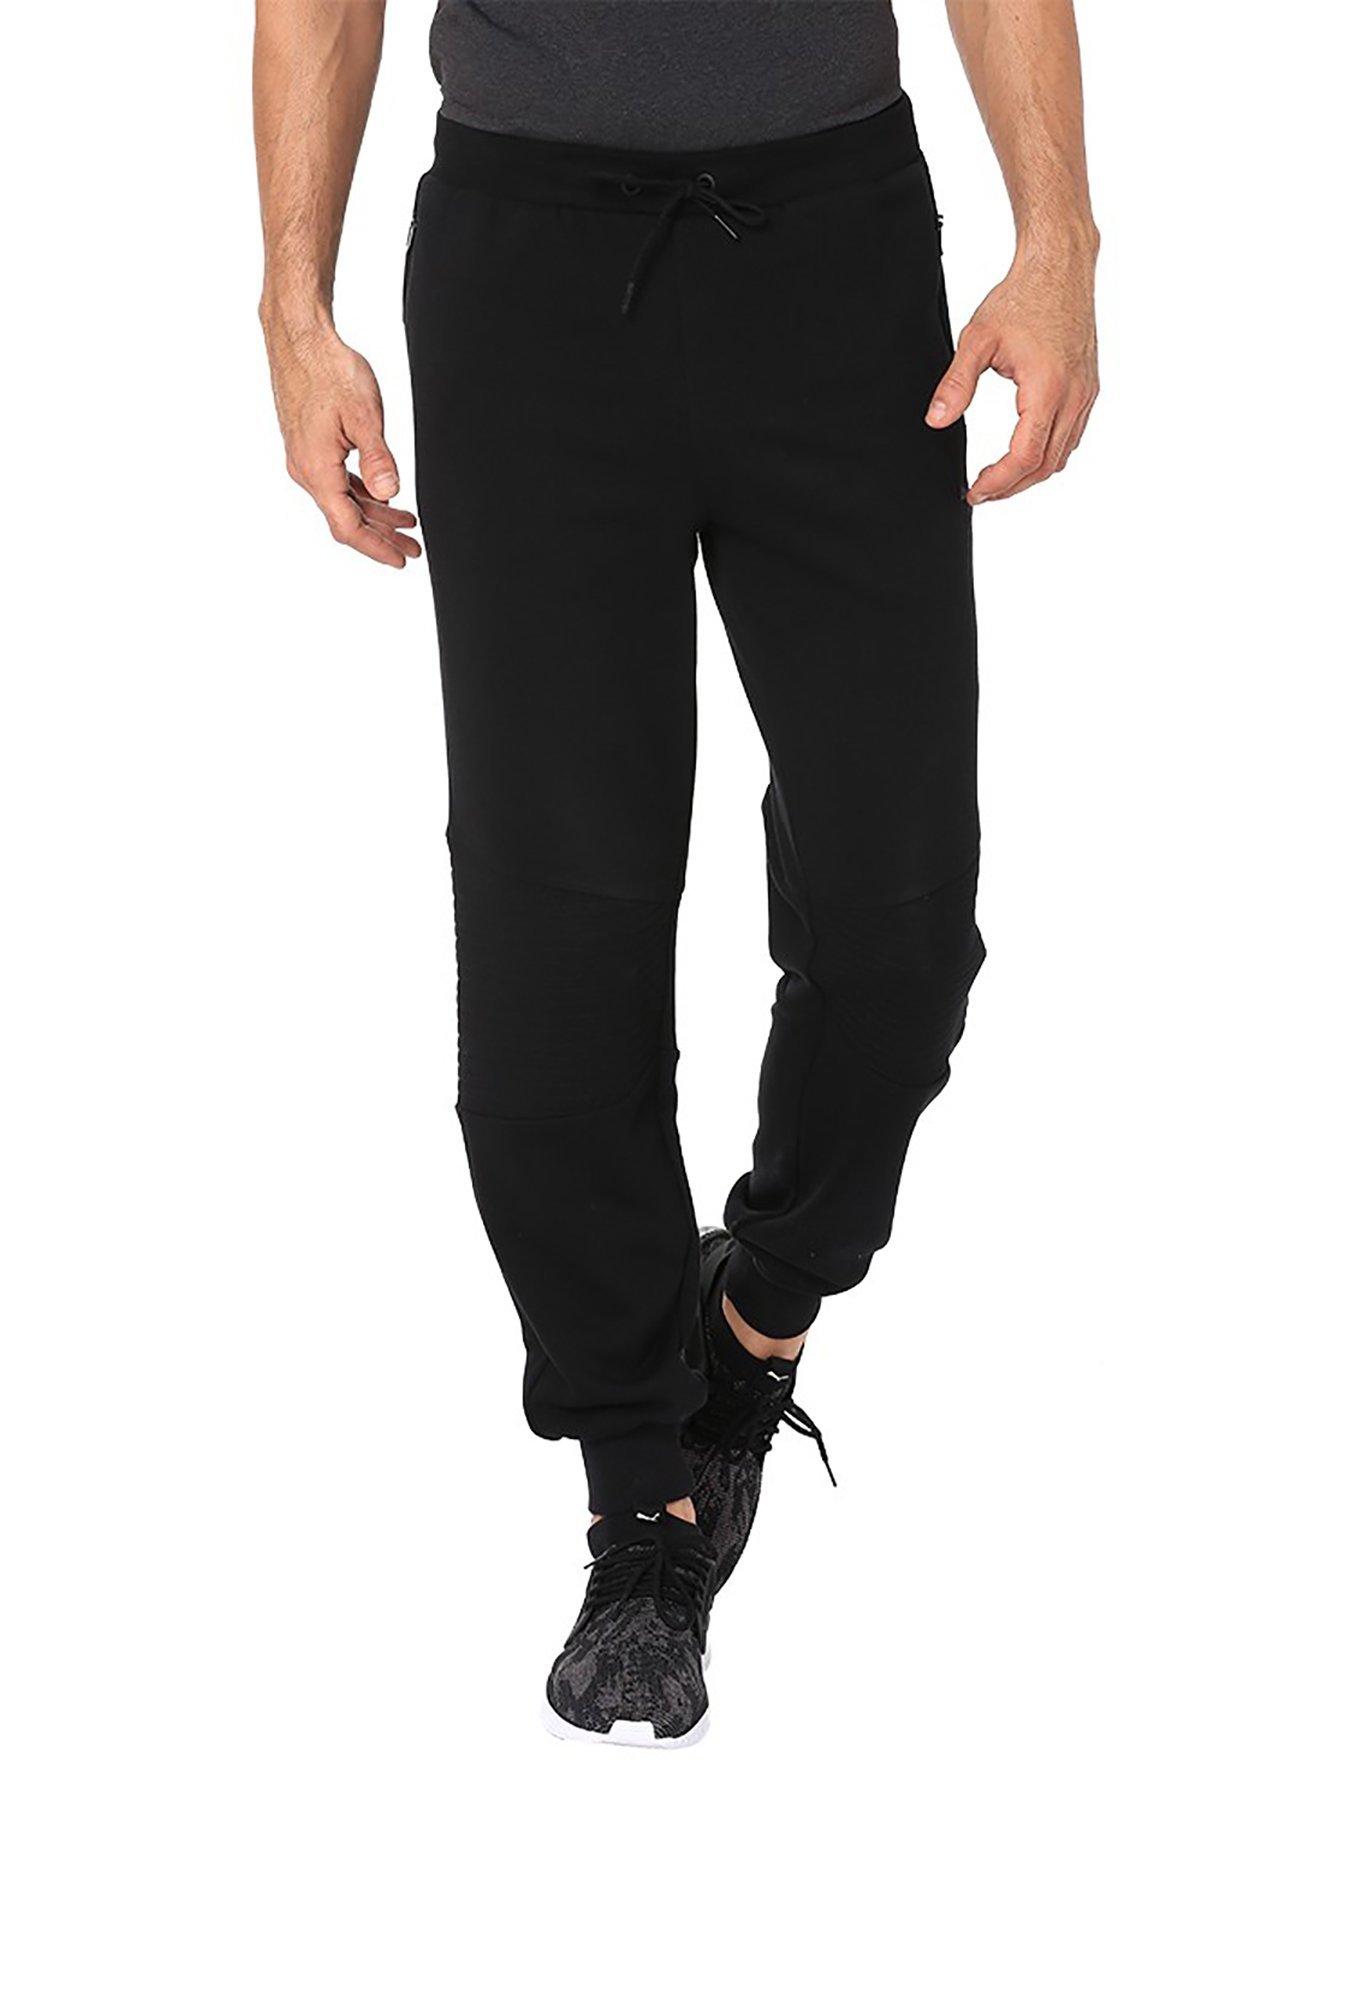 Buy Puma One8 x Black Track Pants for Men Online @ ₹999 from ShopClues